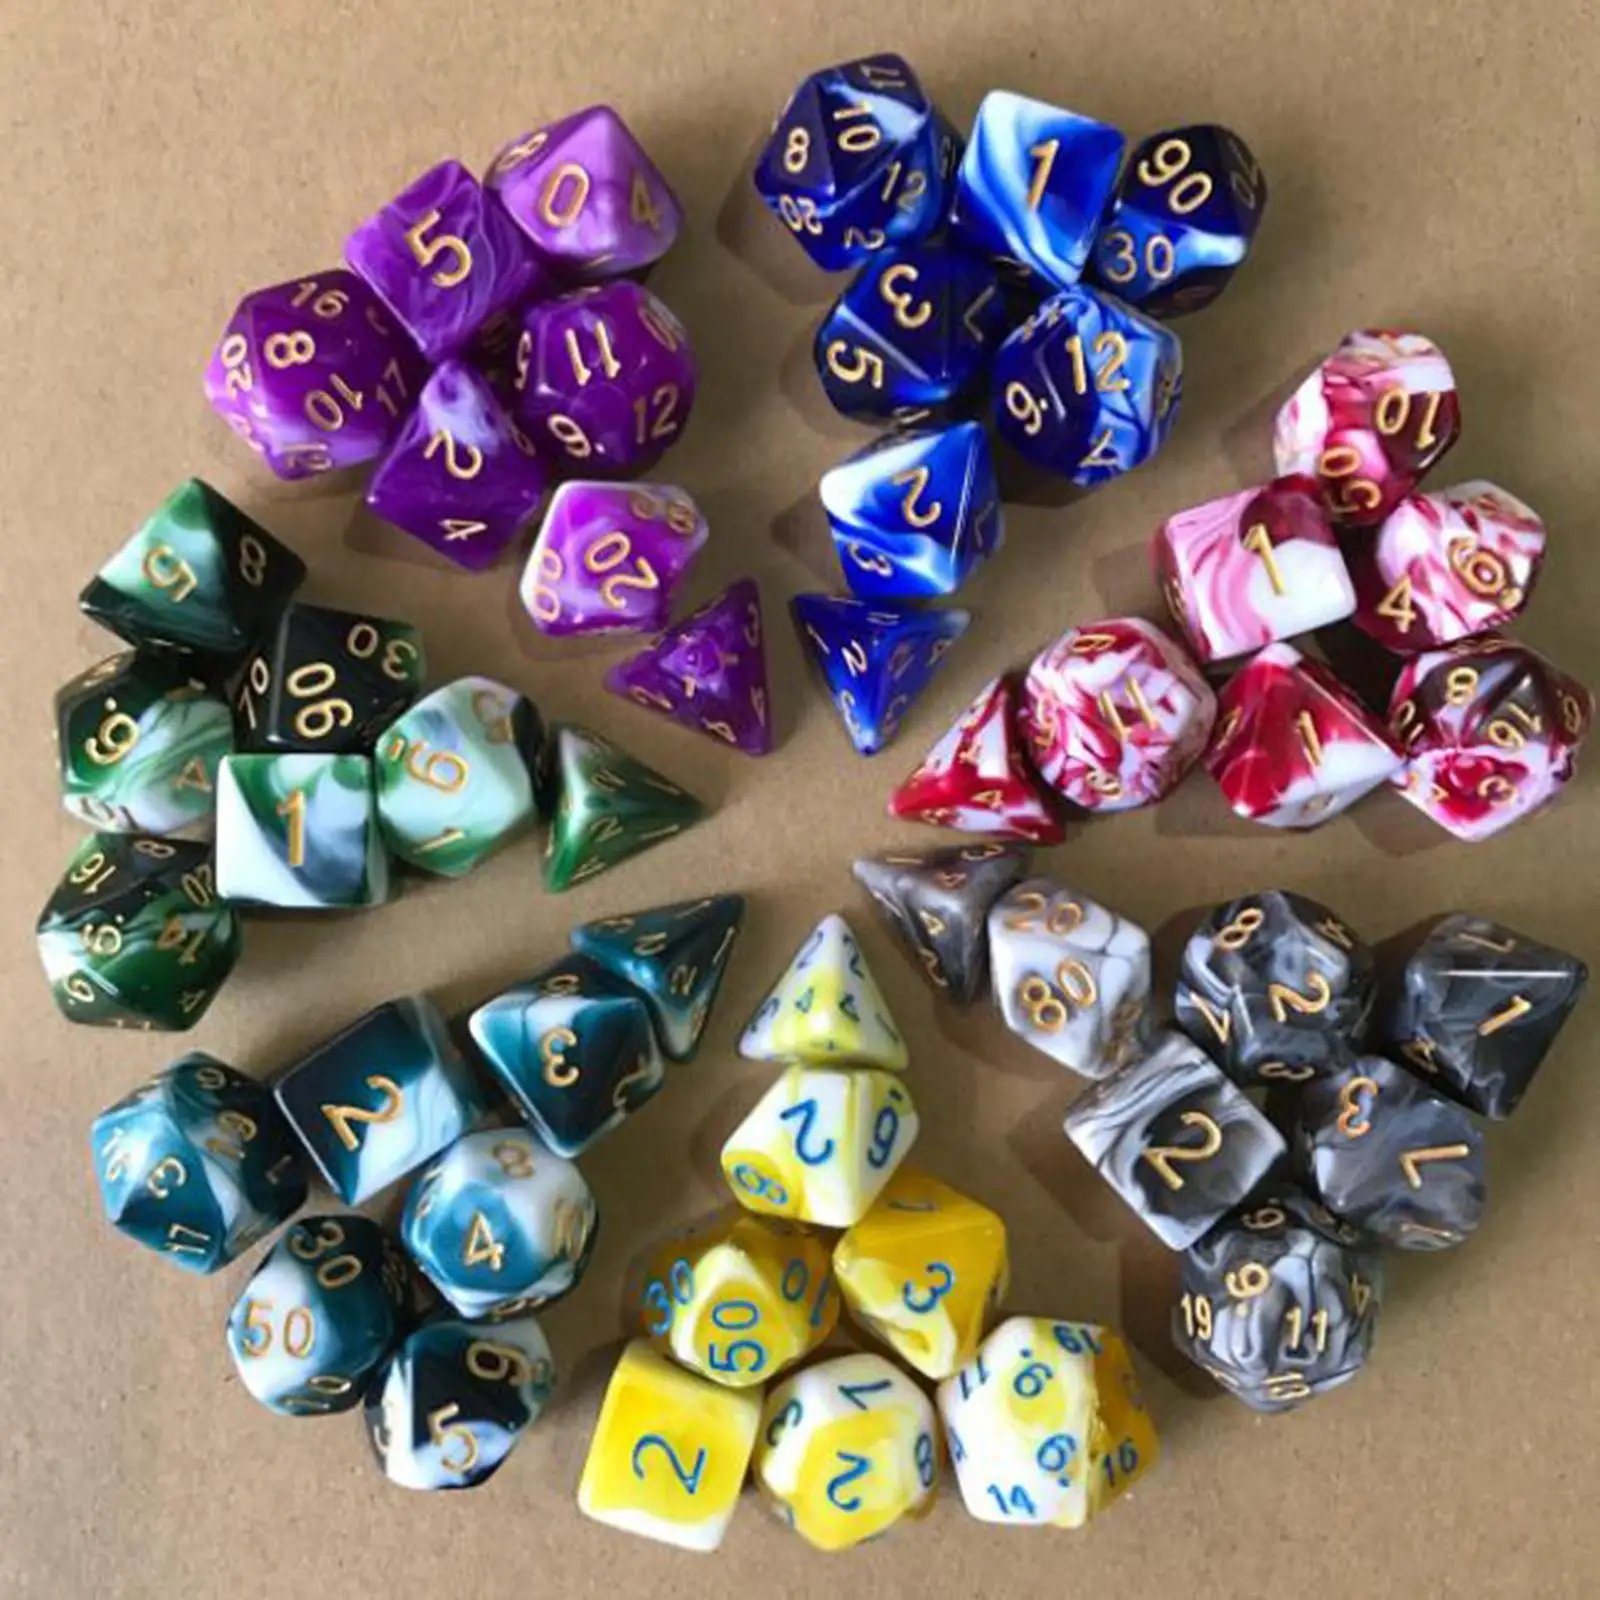 49 Polyhedral Dices Set Party Toys D4-D20 with Pouch for DND Role Playing RPG Board Game Math Teaching